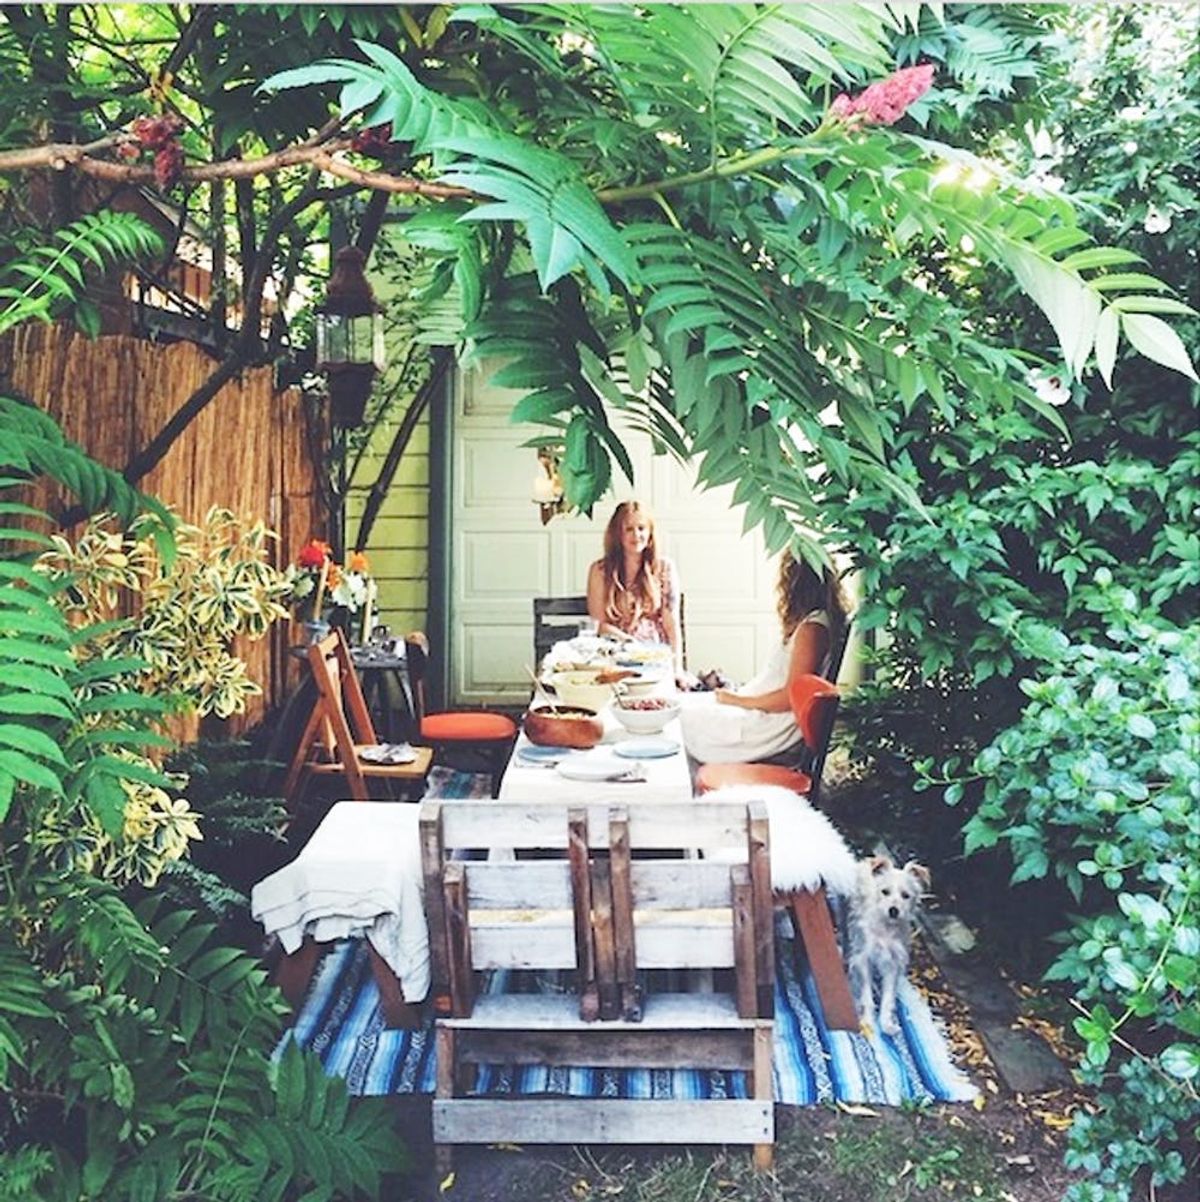 Follow These Instagram Accounts for Backyard Party Inspo